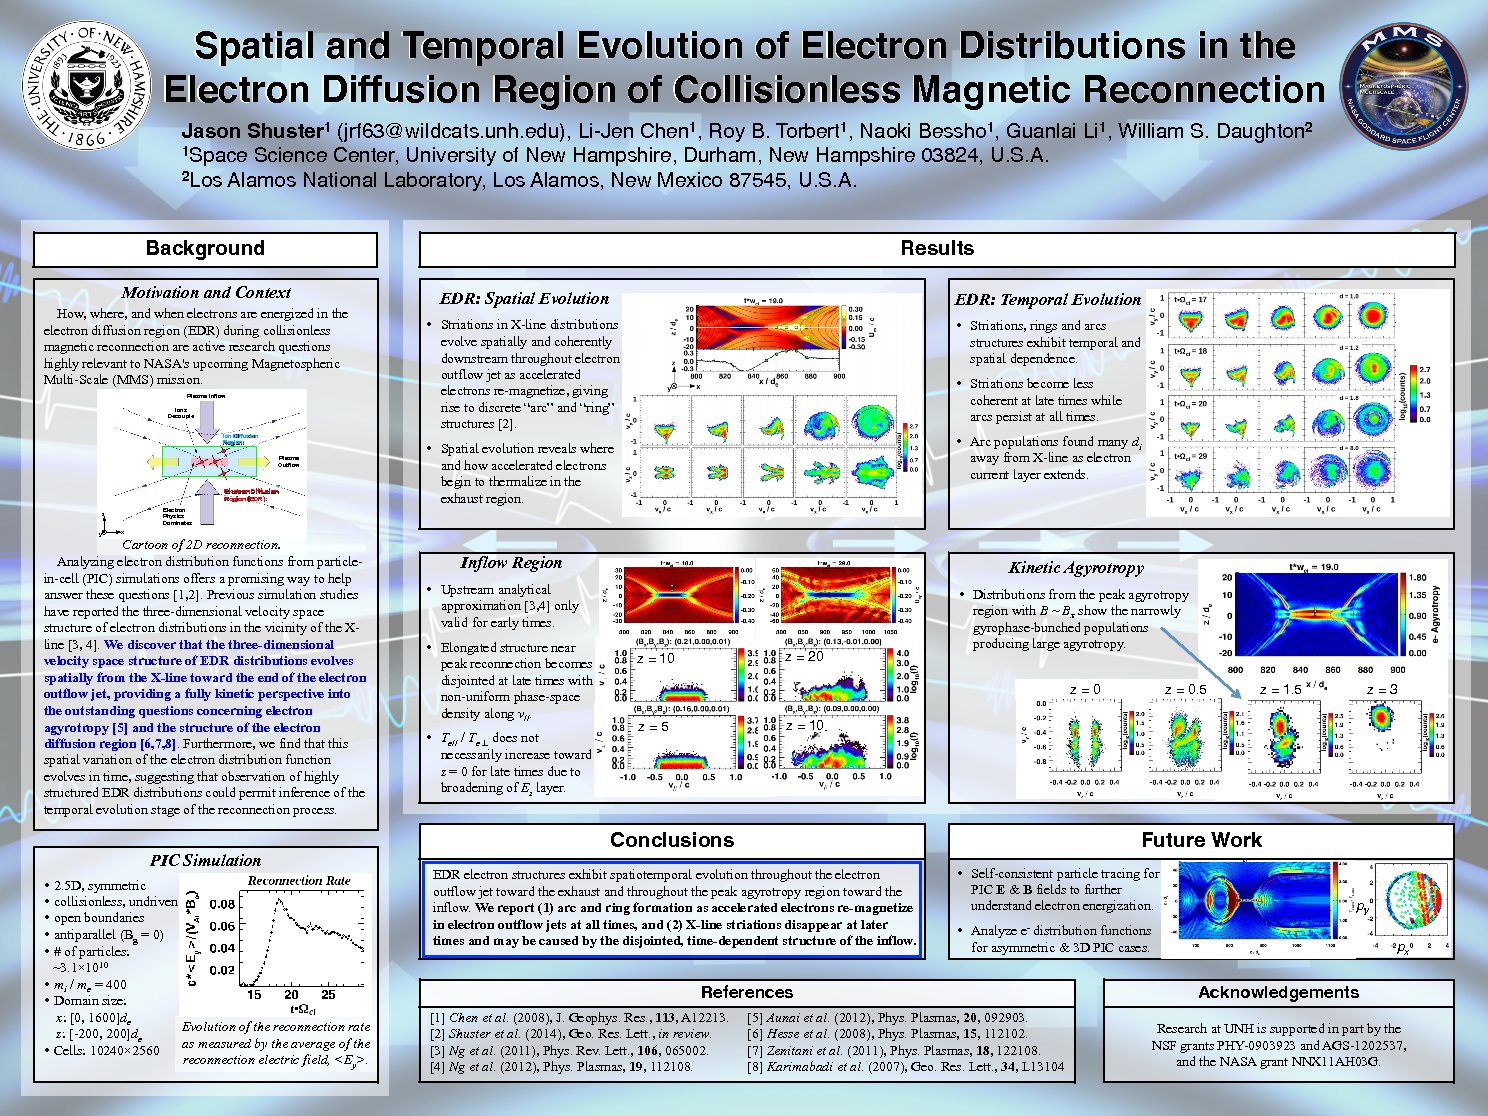 Spatial And Temporal Evolution Of Electron Distributions In The Electron Diffusion Region Of Collisionless Magnetic Reconnection by shuster